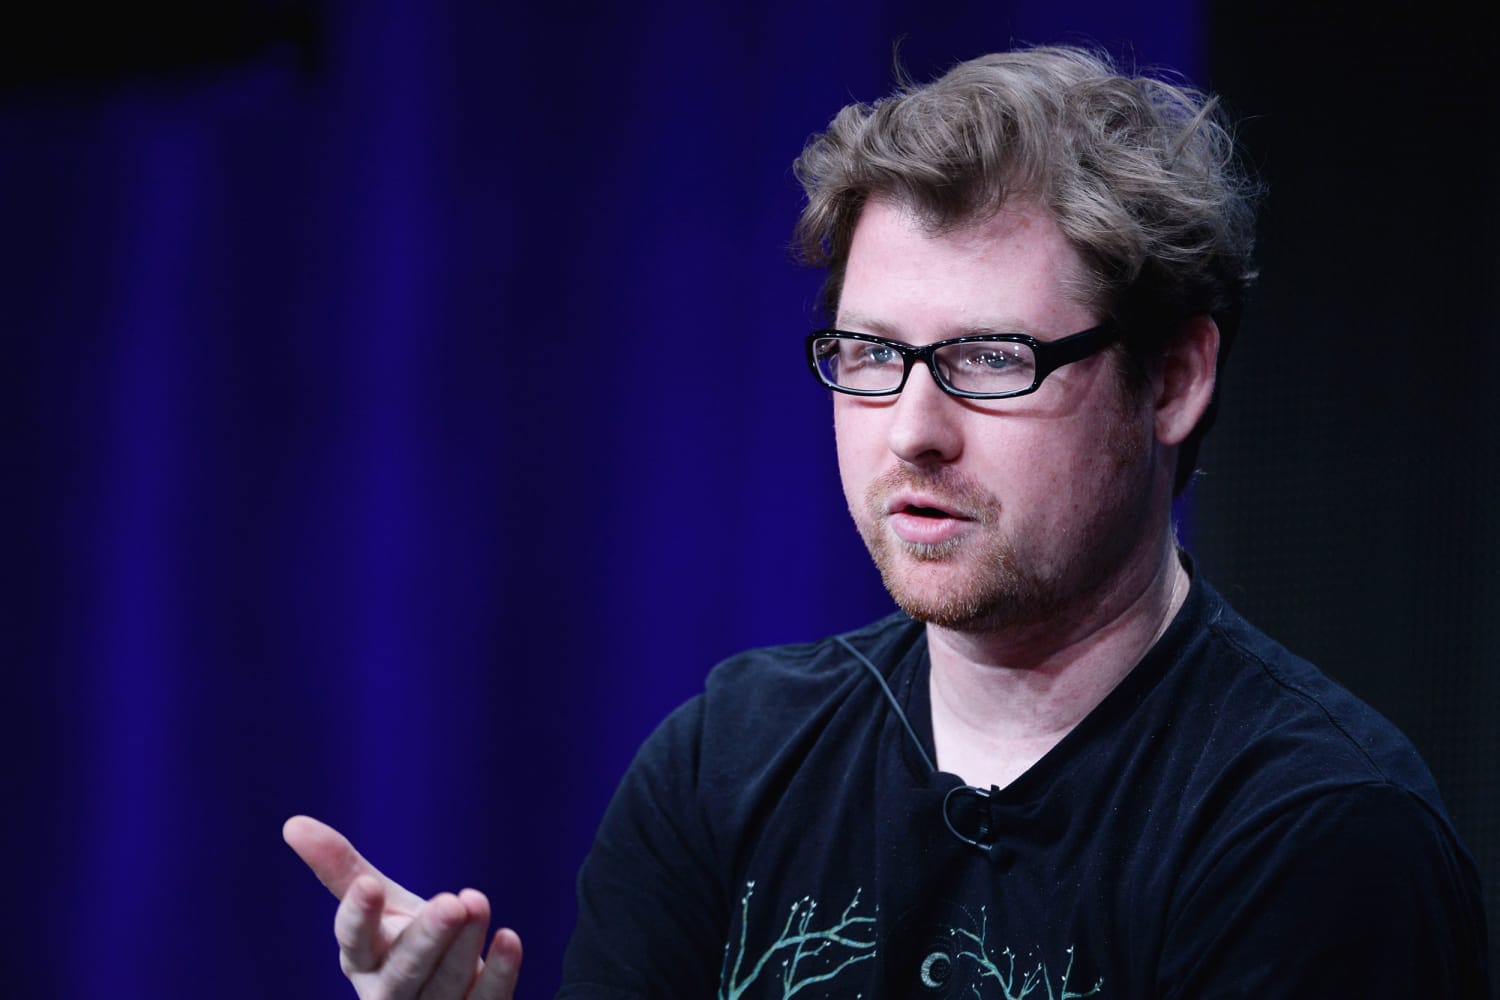 Adult Swim cuts ties with Justin Roiland following domestic abuse allegations